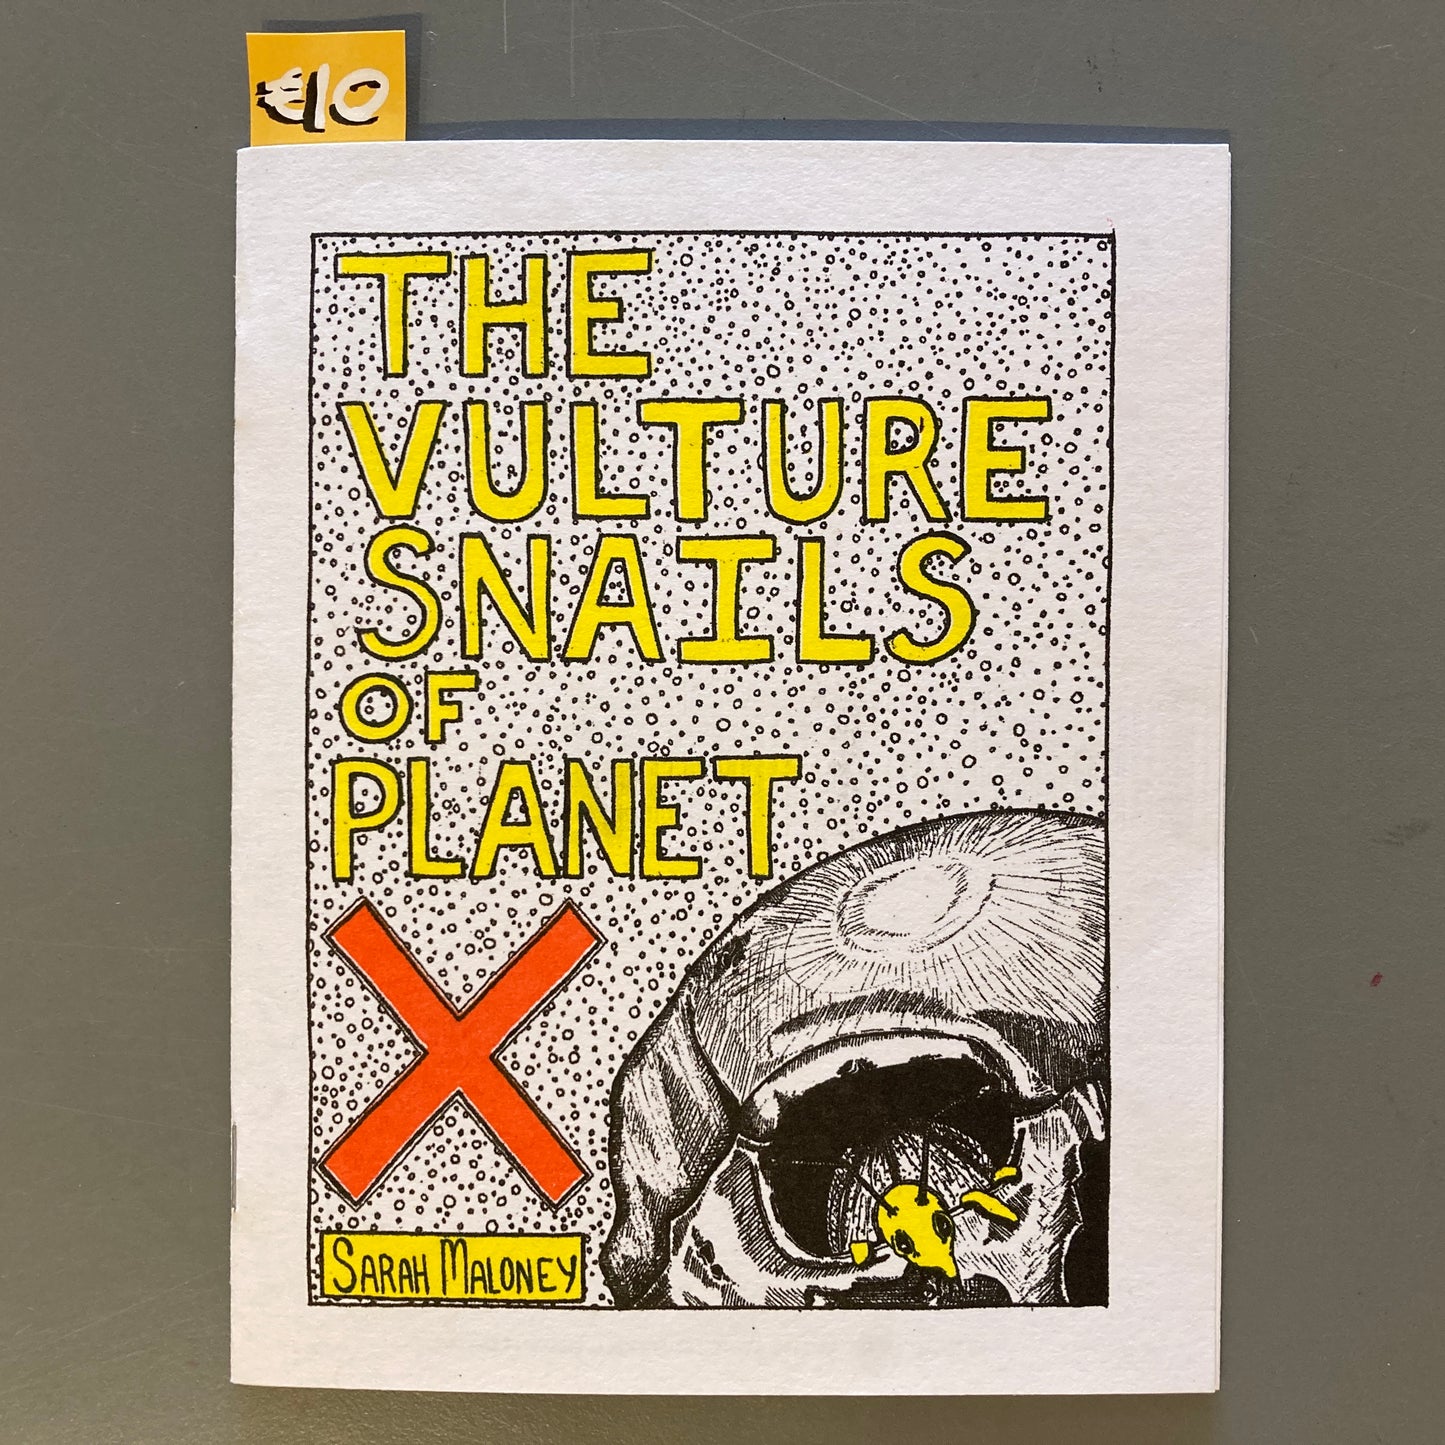 The Vulture Snails of Planet X